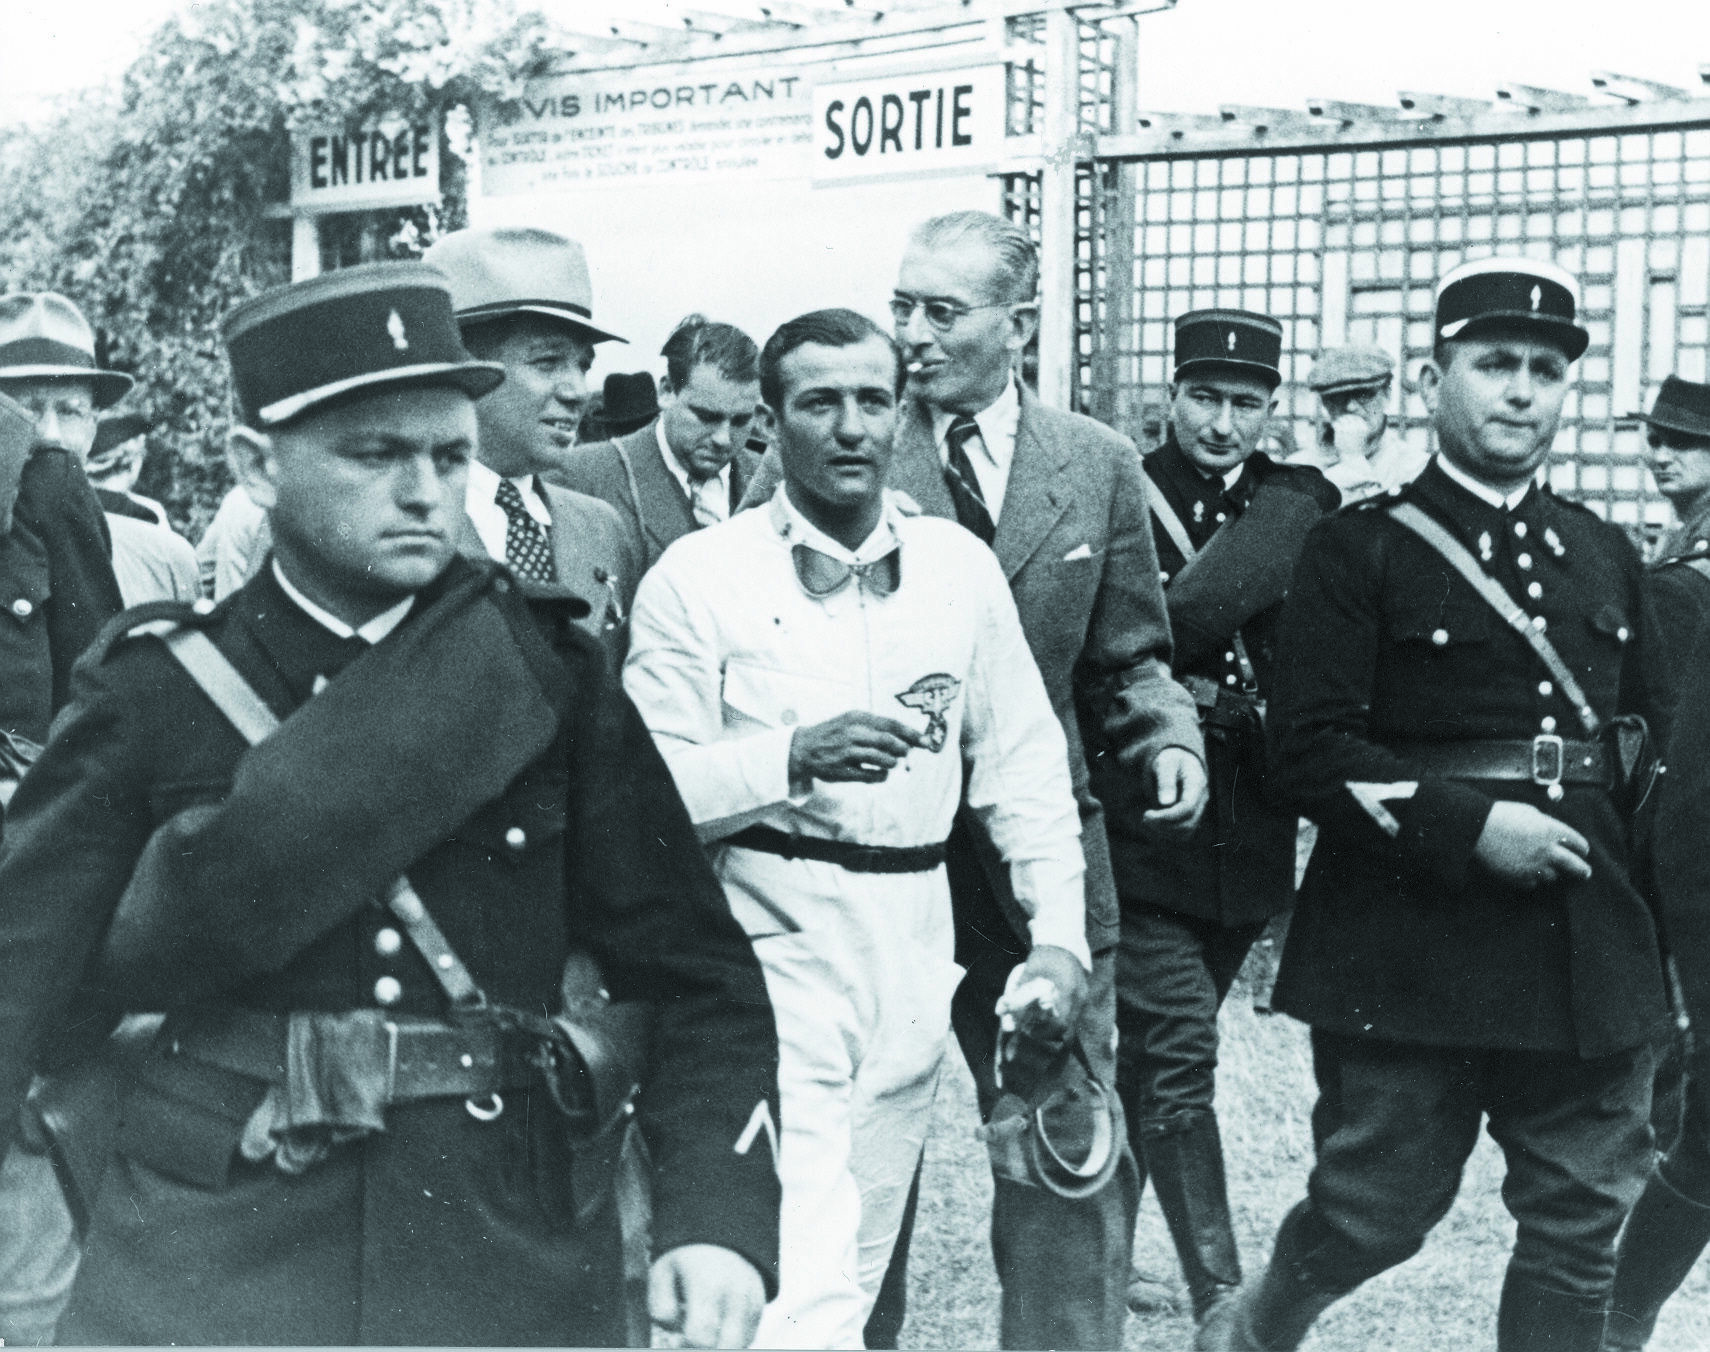 H.P. Mueller 1939: The Auto Union racing-car driver is led to the victory ceremony after winning the French Grand Prix. On the left behind Mueller: the then Auto Union racing director, Dr. Karl Feuereiszen